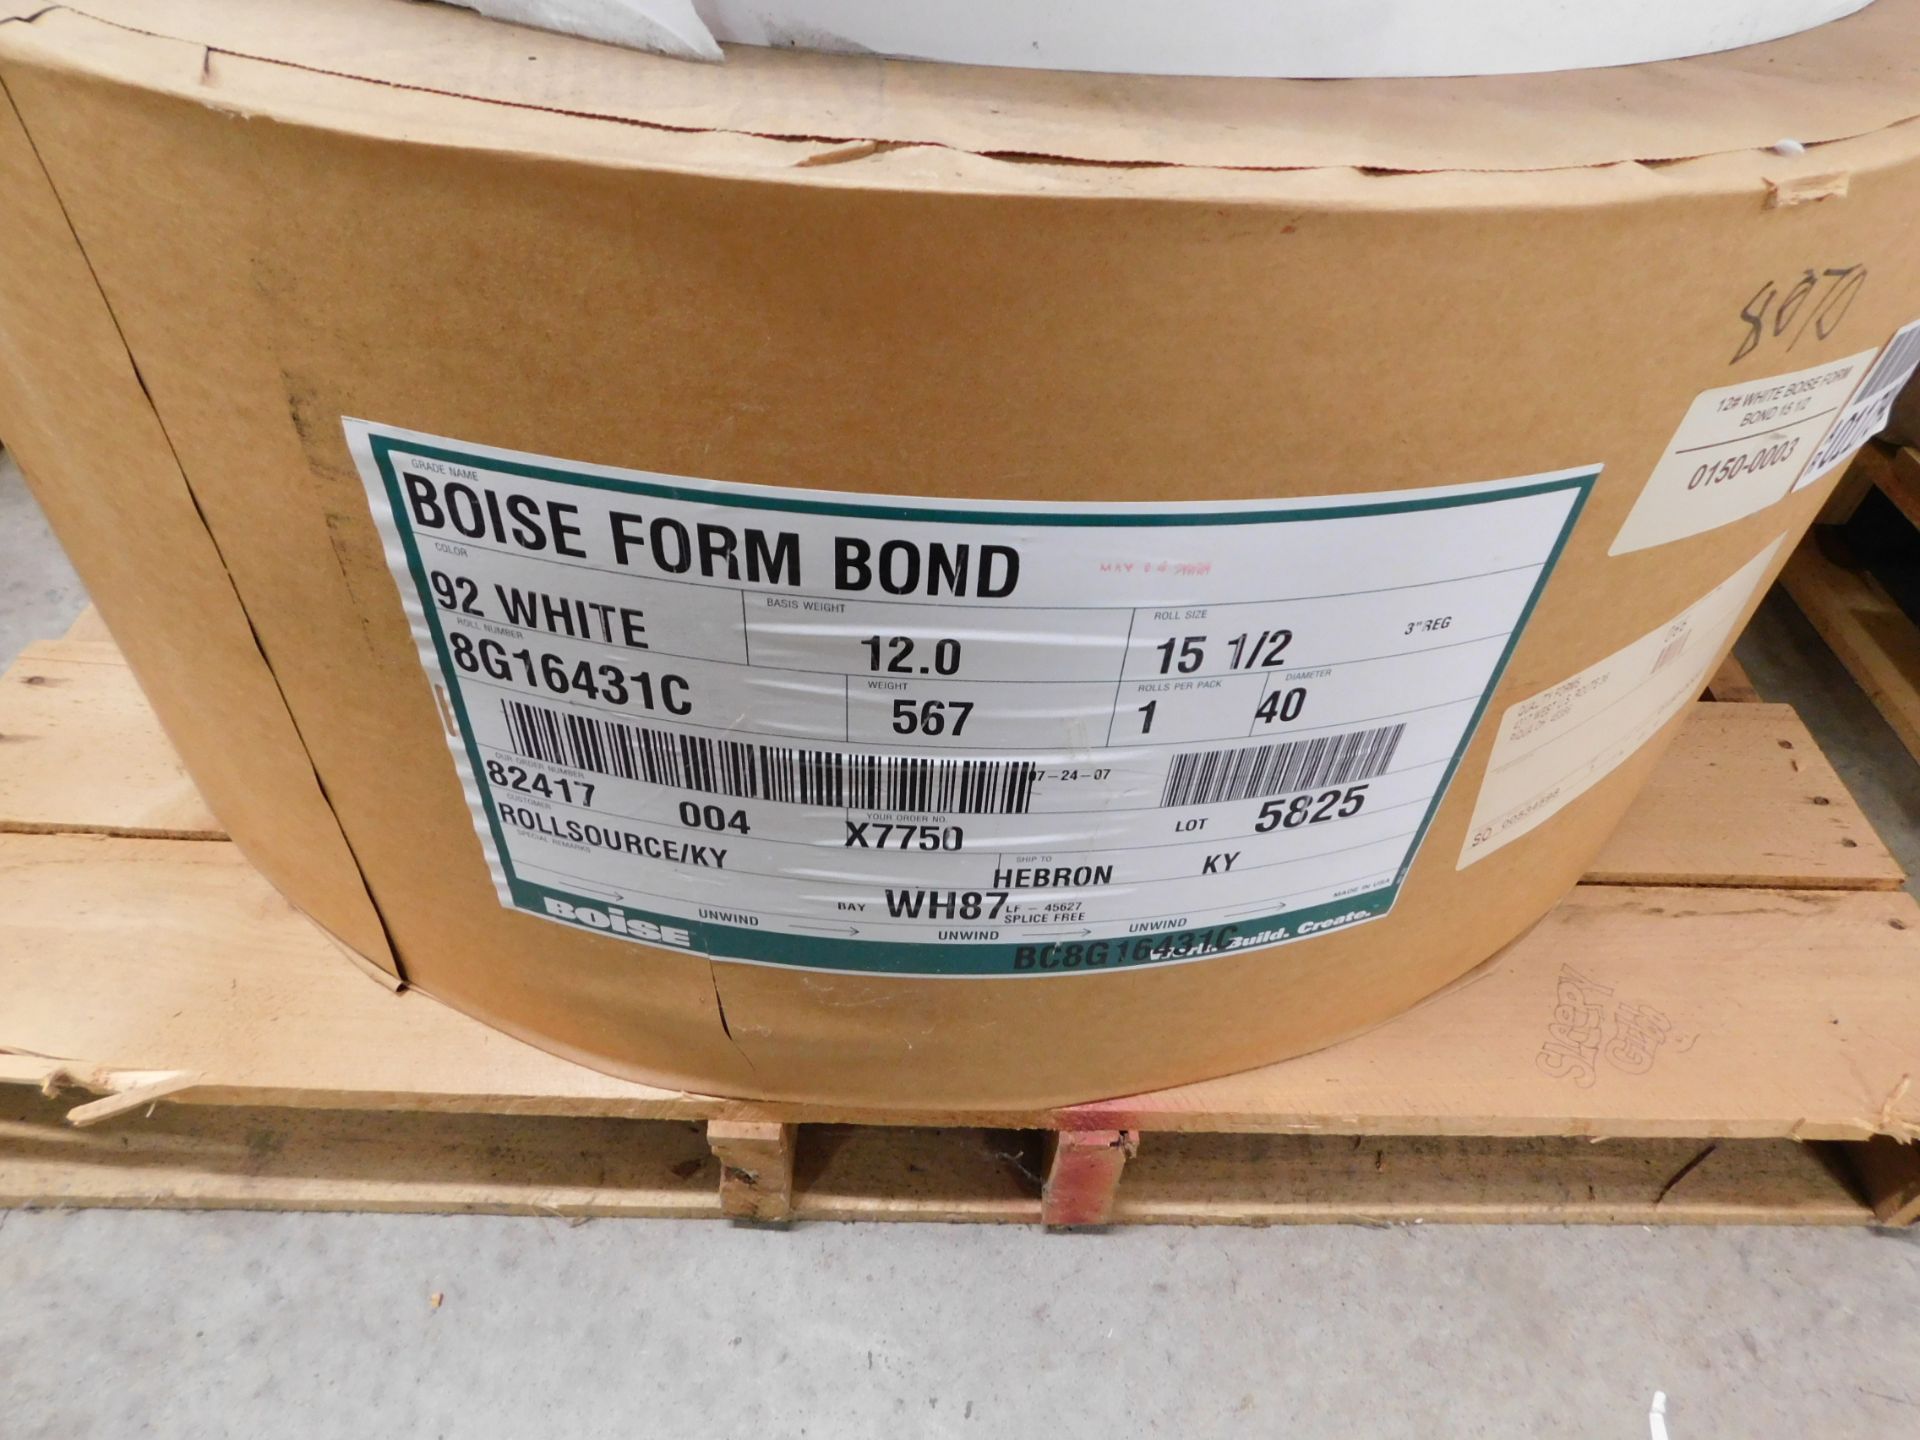 (1) Pixelle Moistrite Form Bond 12.0, 9 1/2" and 12 1/2", New; and (1) Boise Form Bond 12.0, 15 1/ - Image 5 of 6